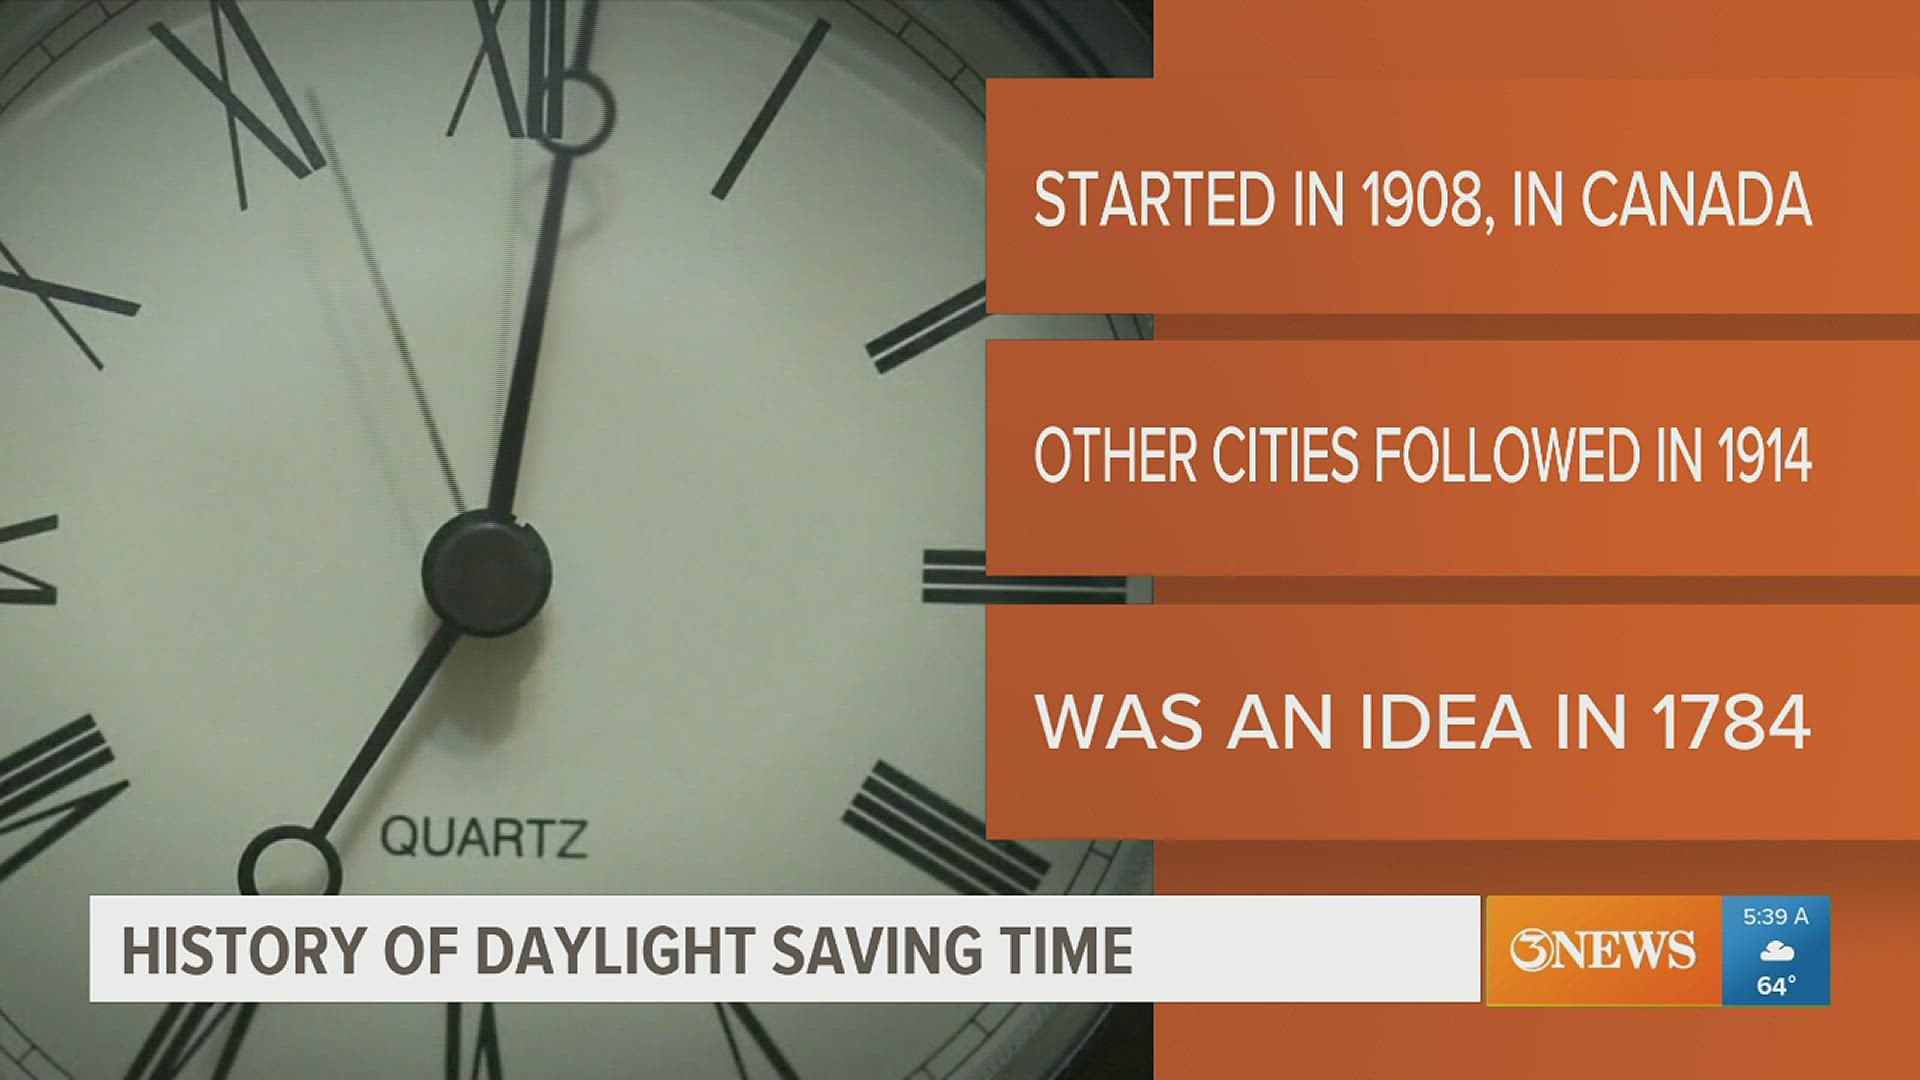 Why Do We Have Daylight Savings Time - History of Daylight Savings Time